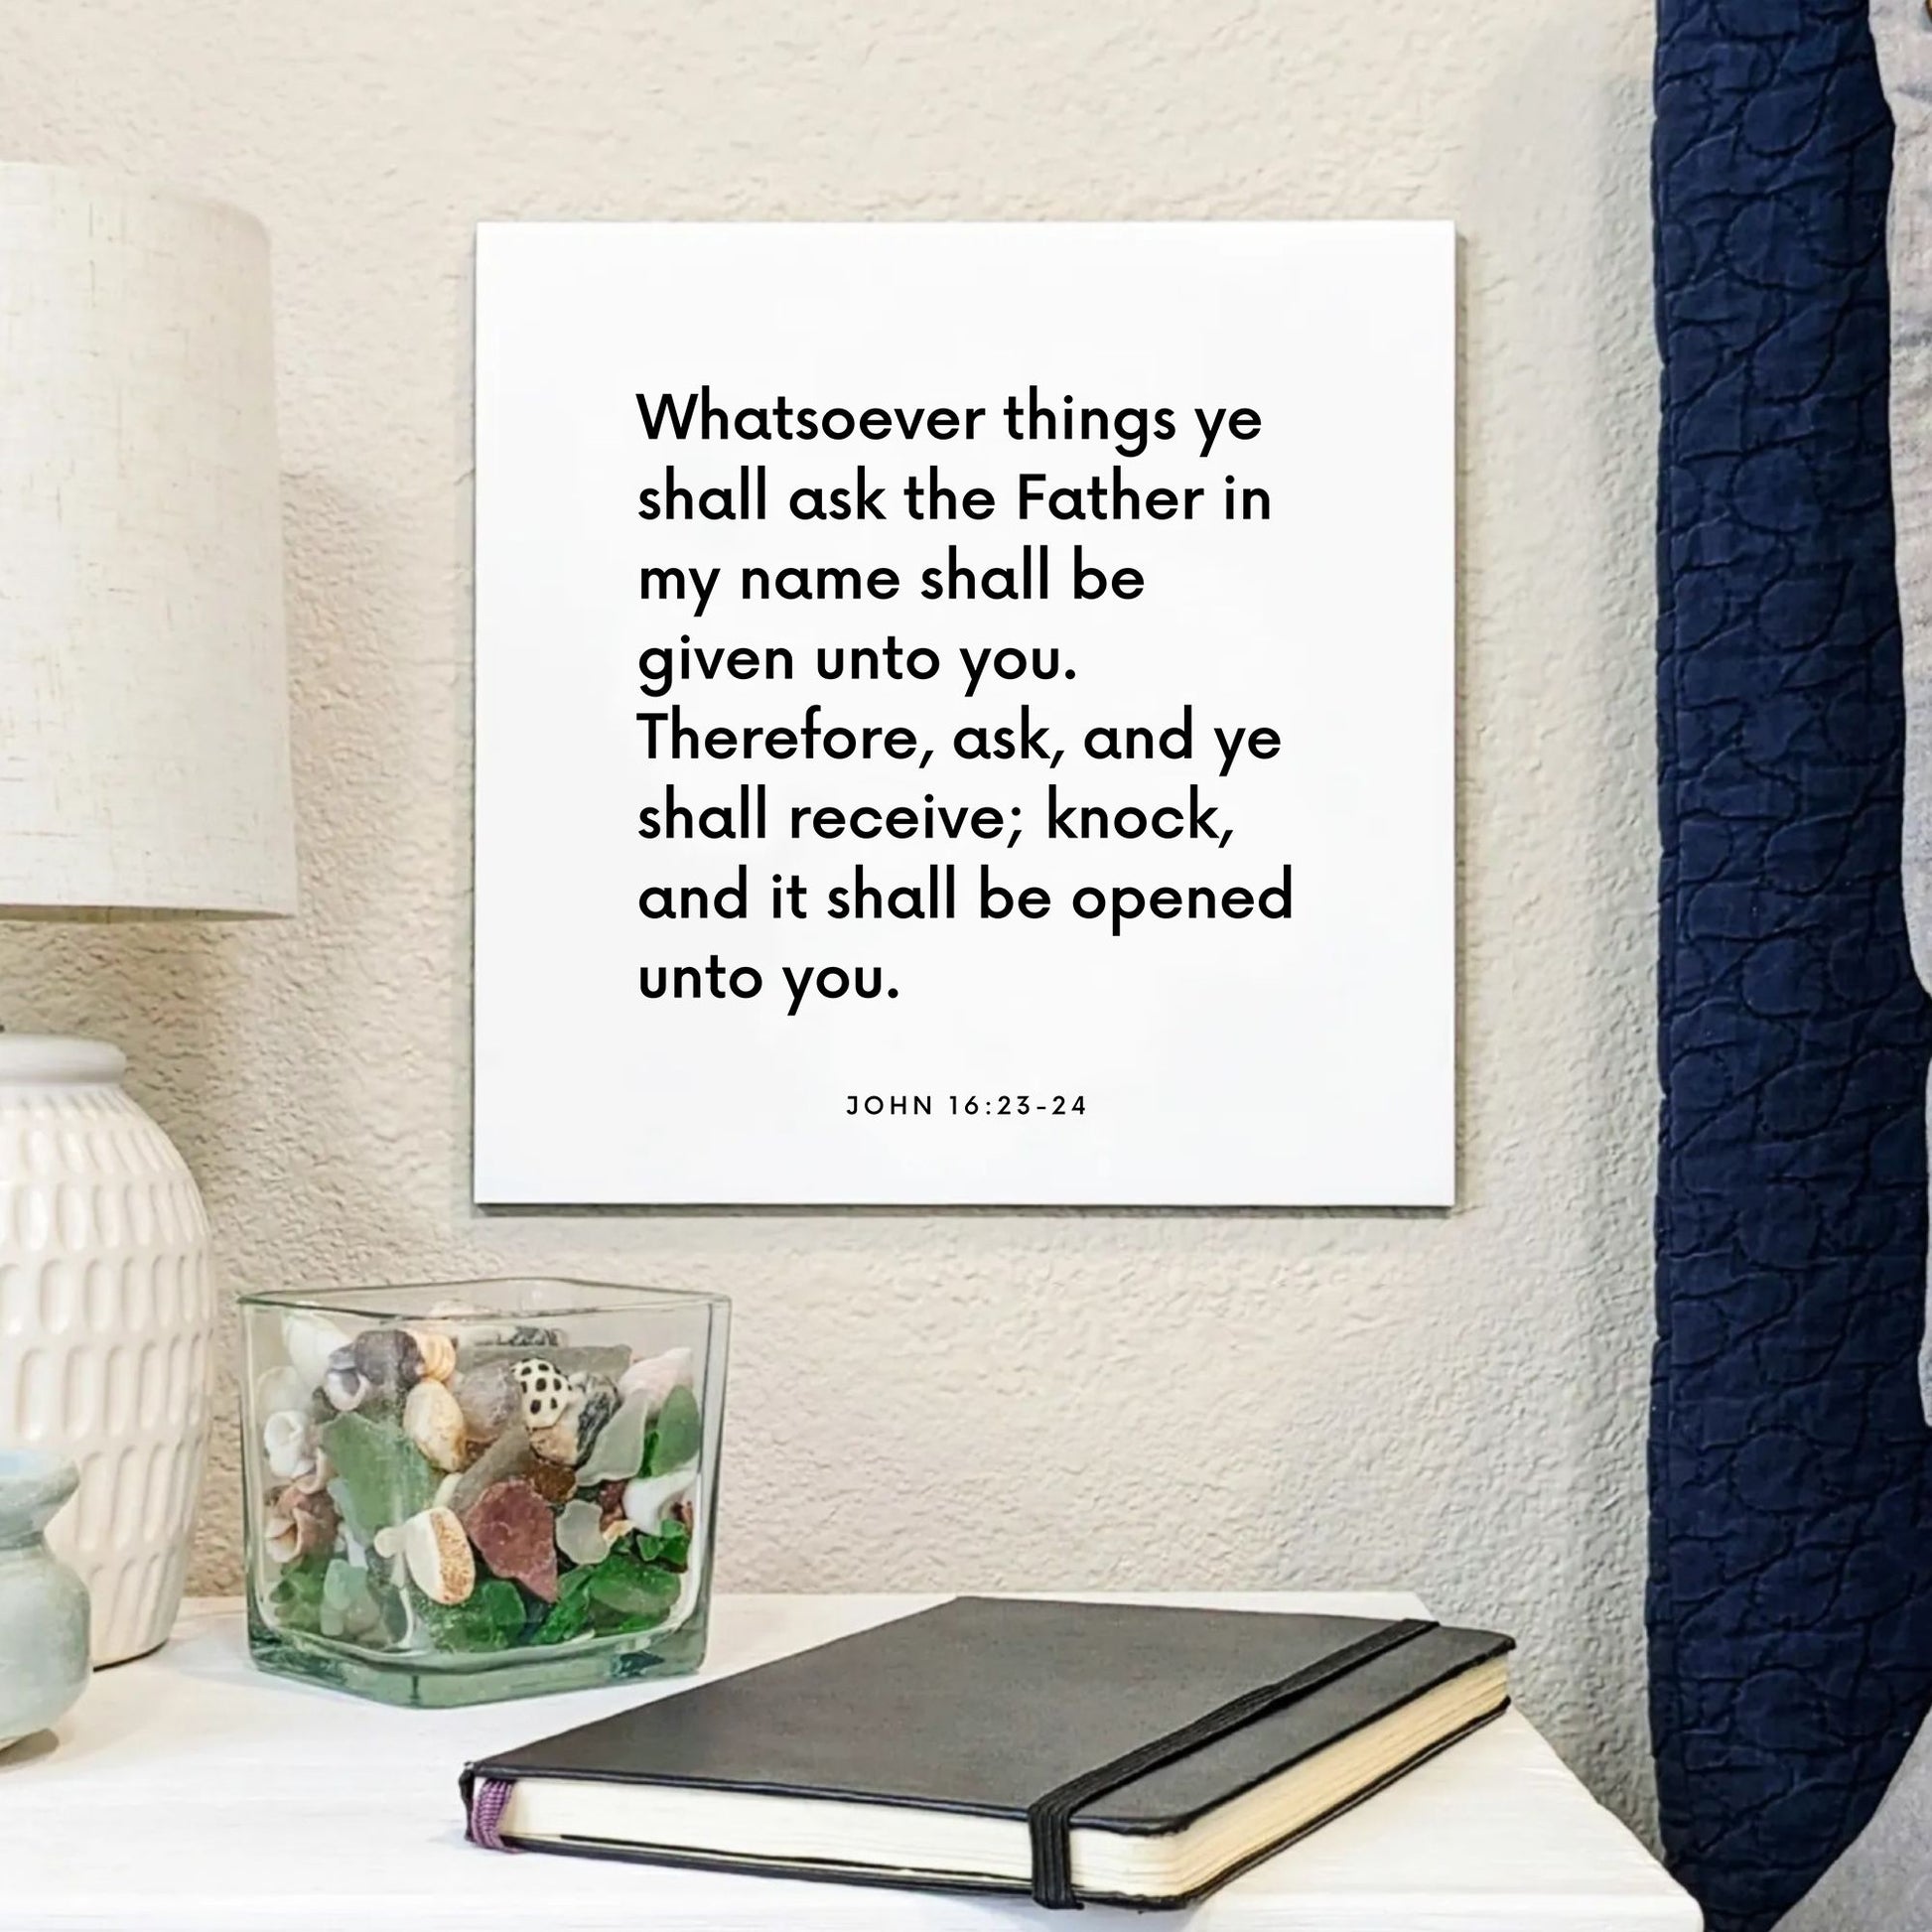 Bedside mouting of the scripture tile for John 16:23-24 - "Whatsoever things ye shall ask the Father in my name"